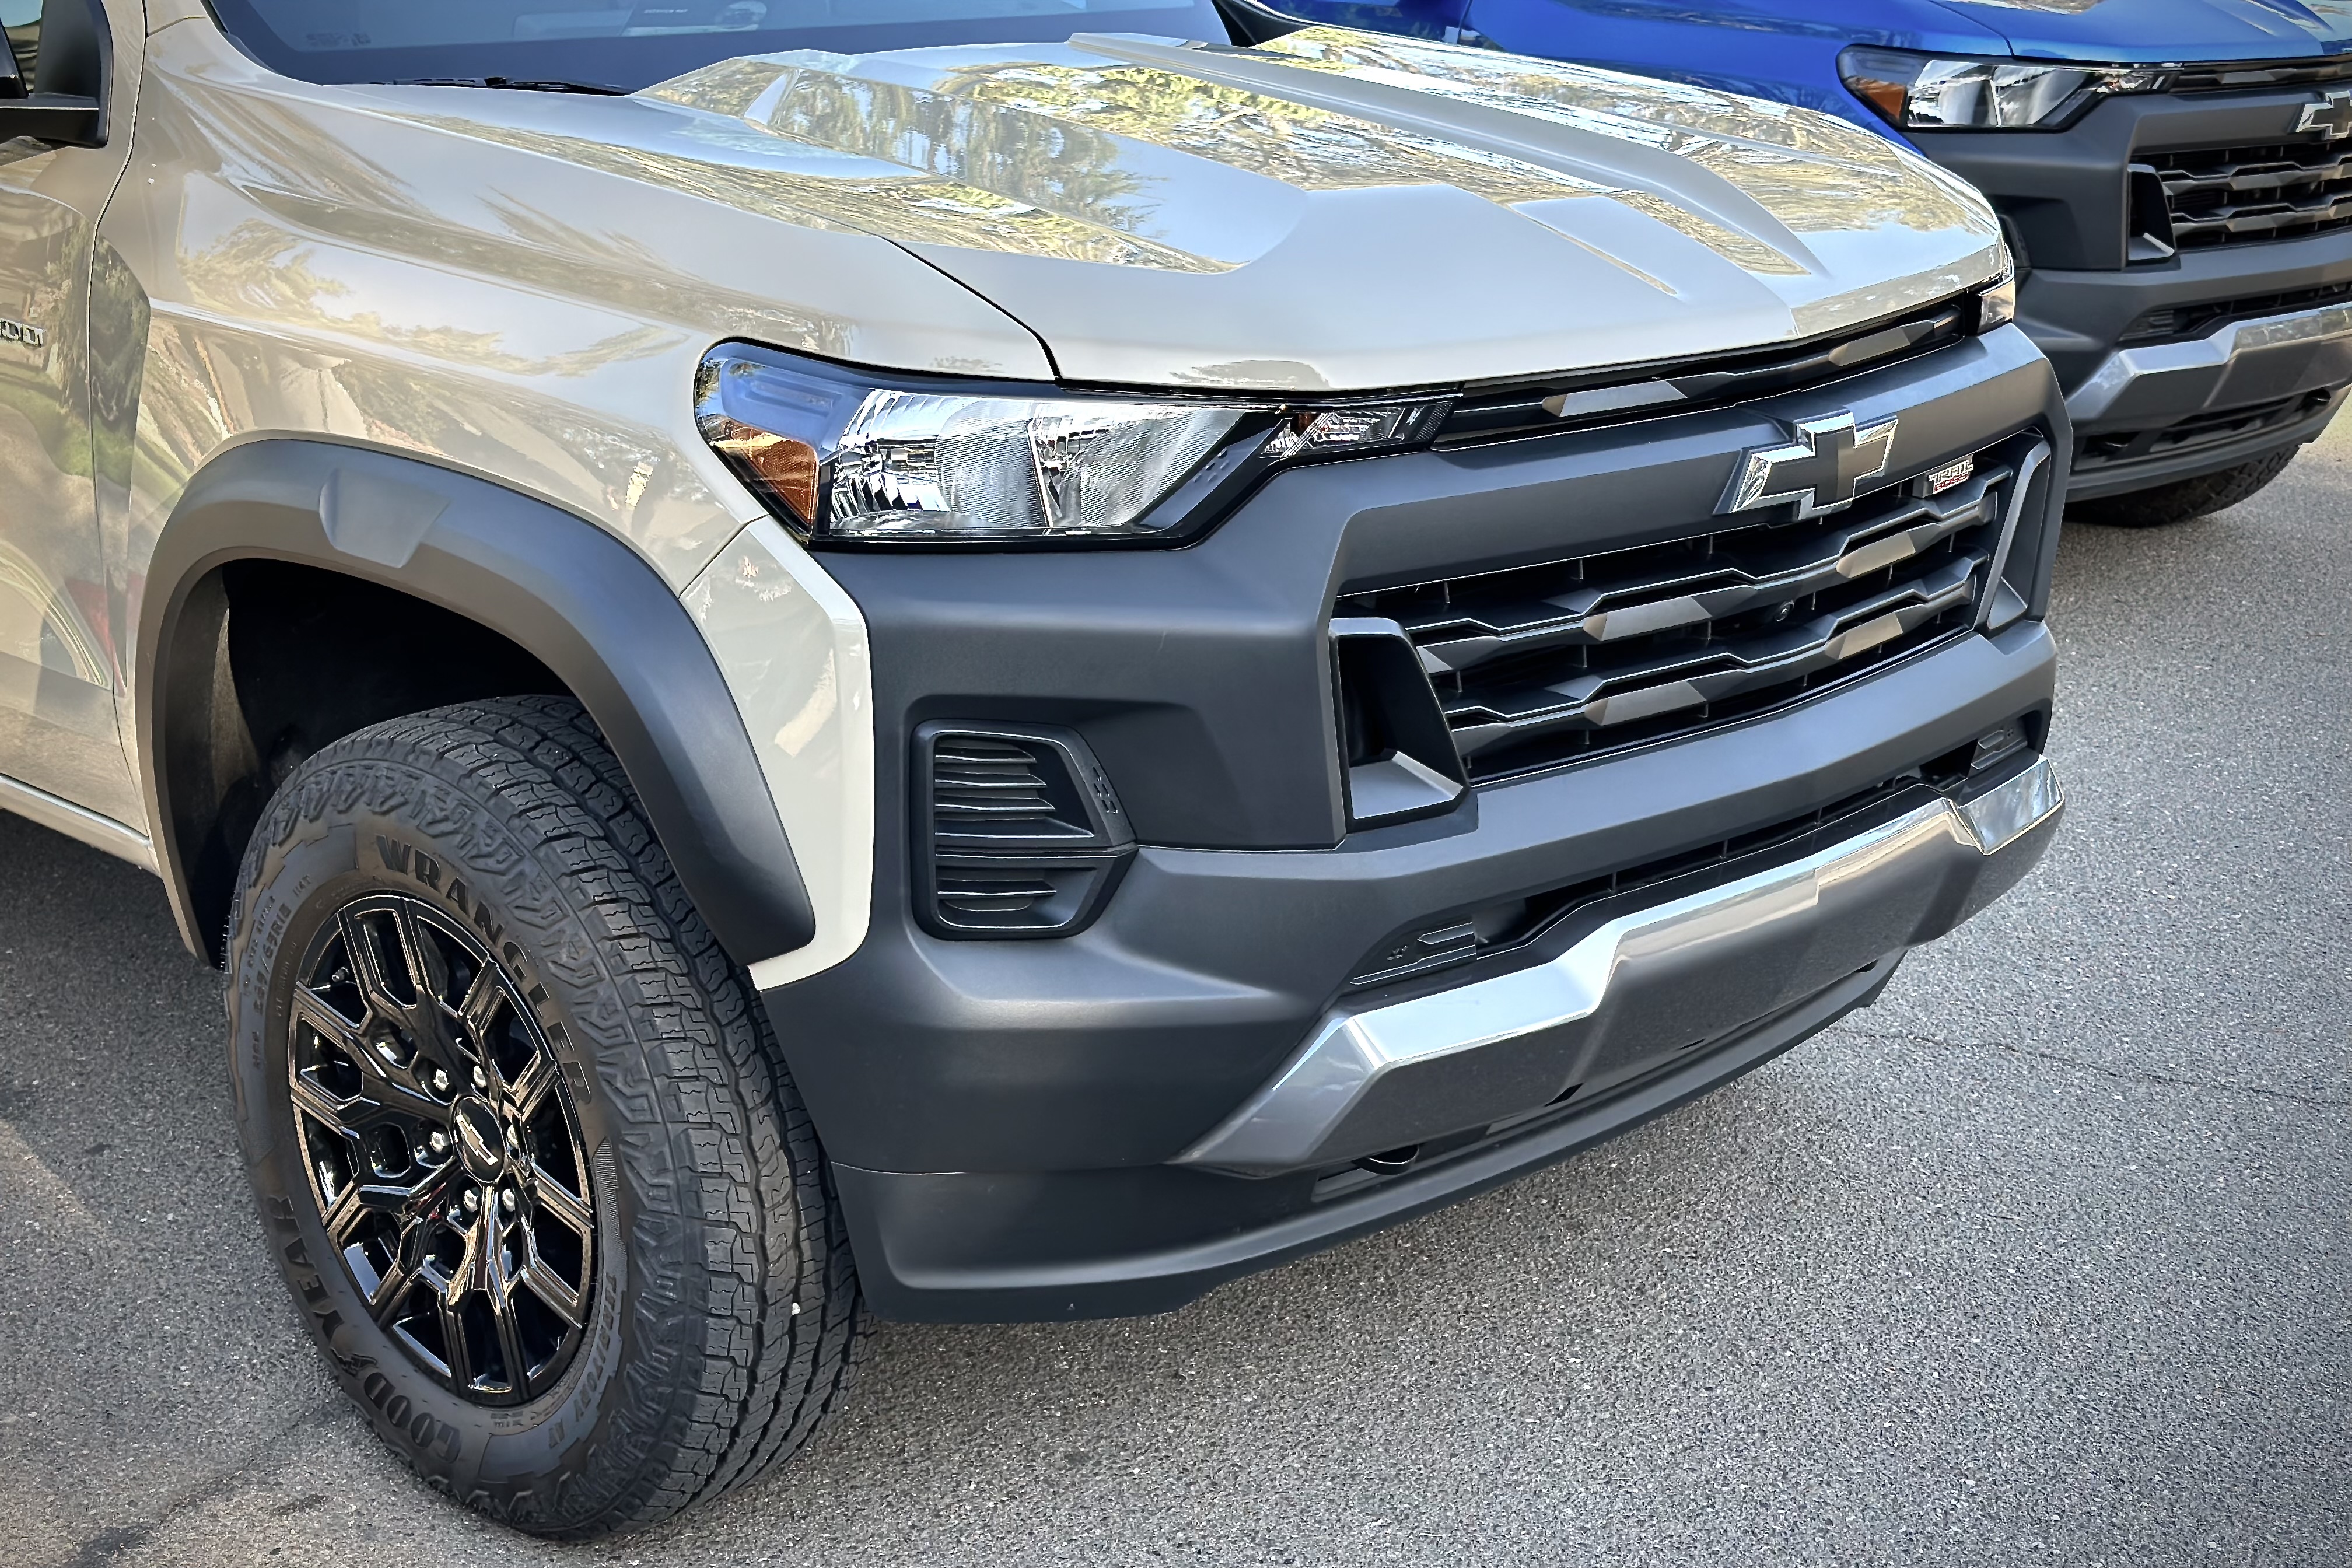 Close up of the front end on the 2023 Chevrolet Colorado Trail Boss parked in a parking lot.